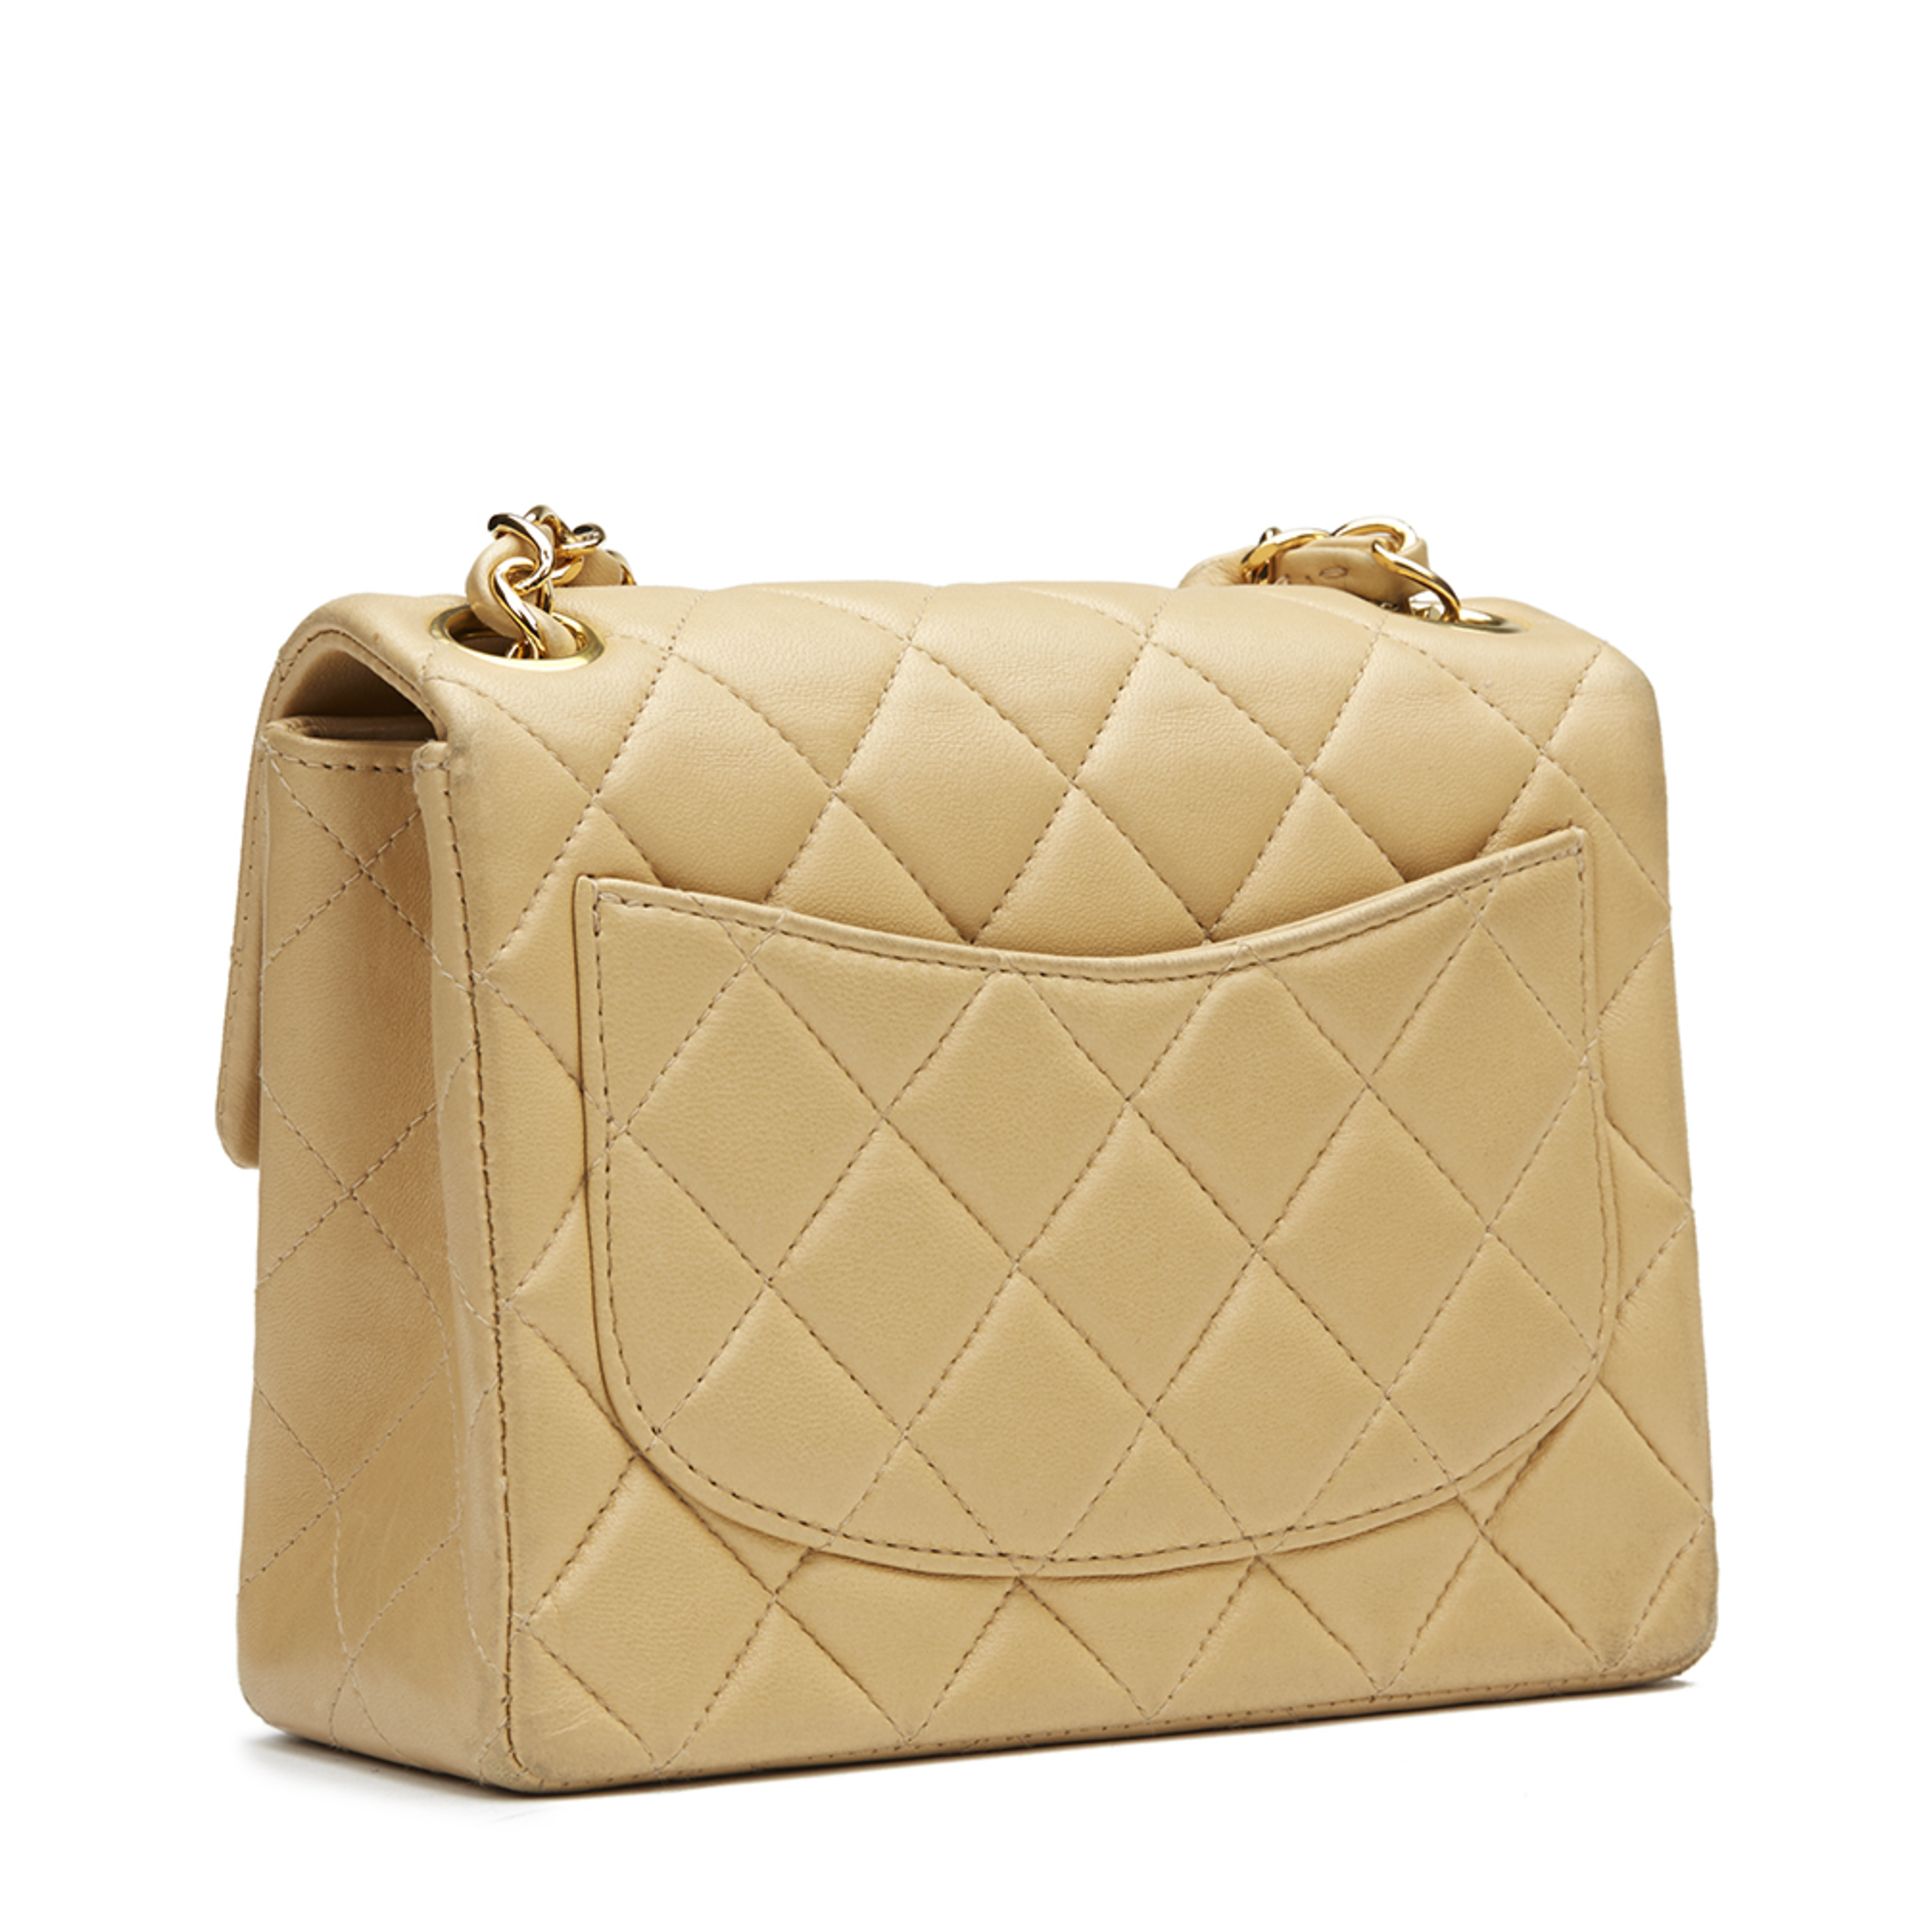 Chanel Beige Quilted Lambskin Vintage Mini Flap Bag - Image 2 of 13